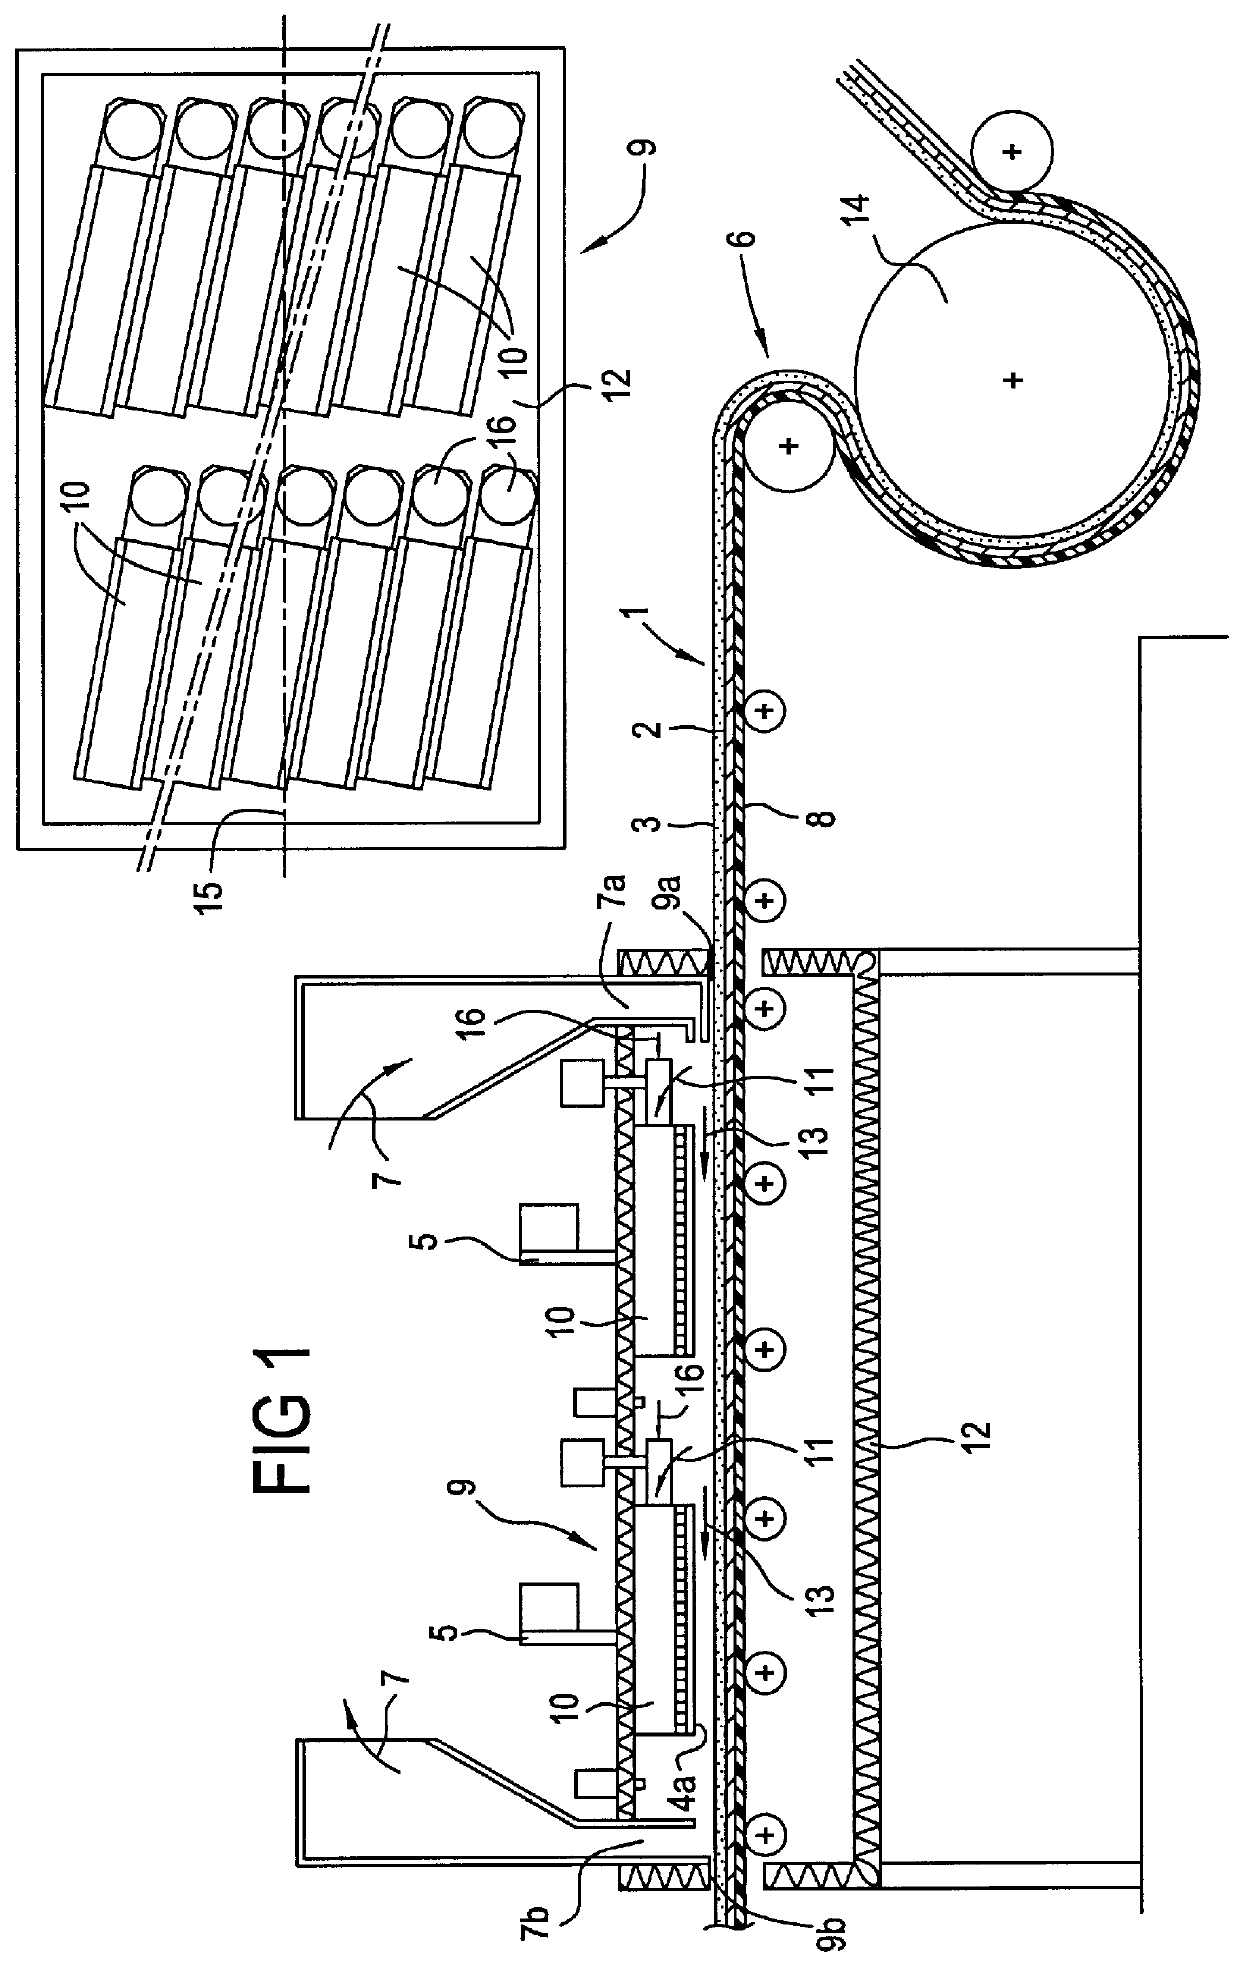 Process and plant for manufacturing a composite plastic structure, for example a floor covering